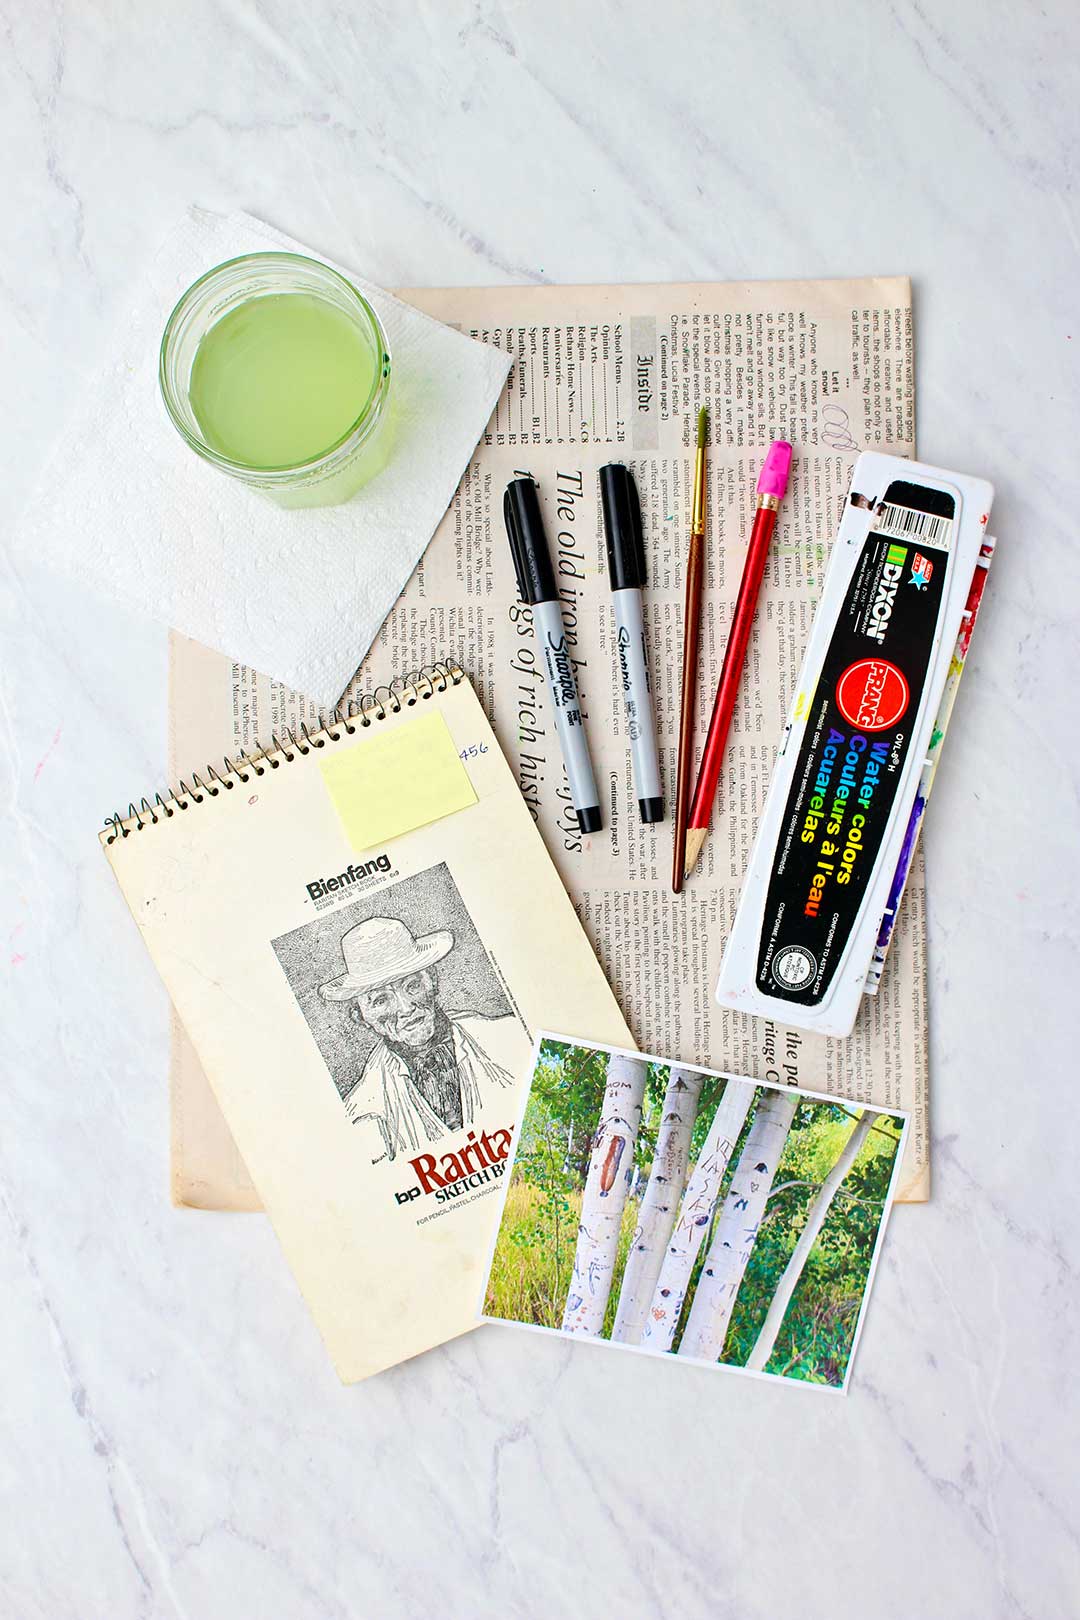 Supplies for aspen tree watercolor painting. Sketch pad, watercolors, inspiration photo, cup of water, newsprint and a paper towel.